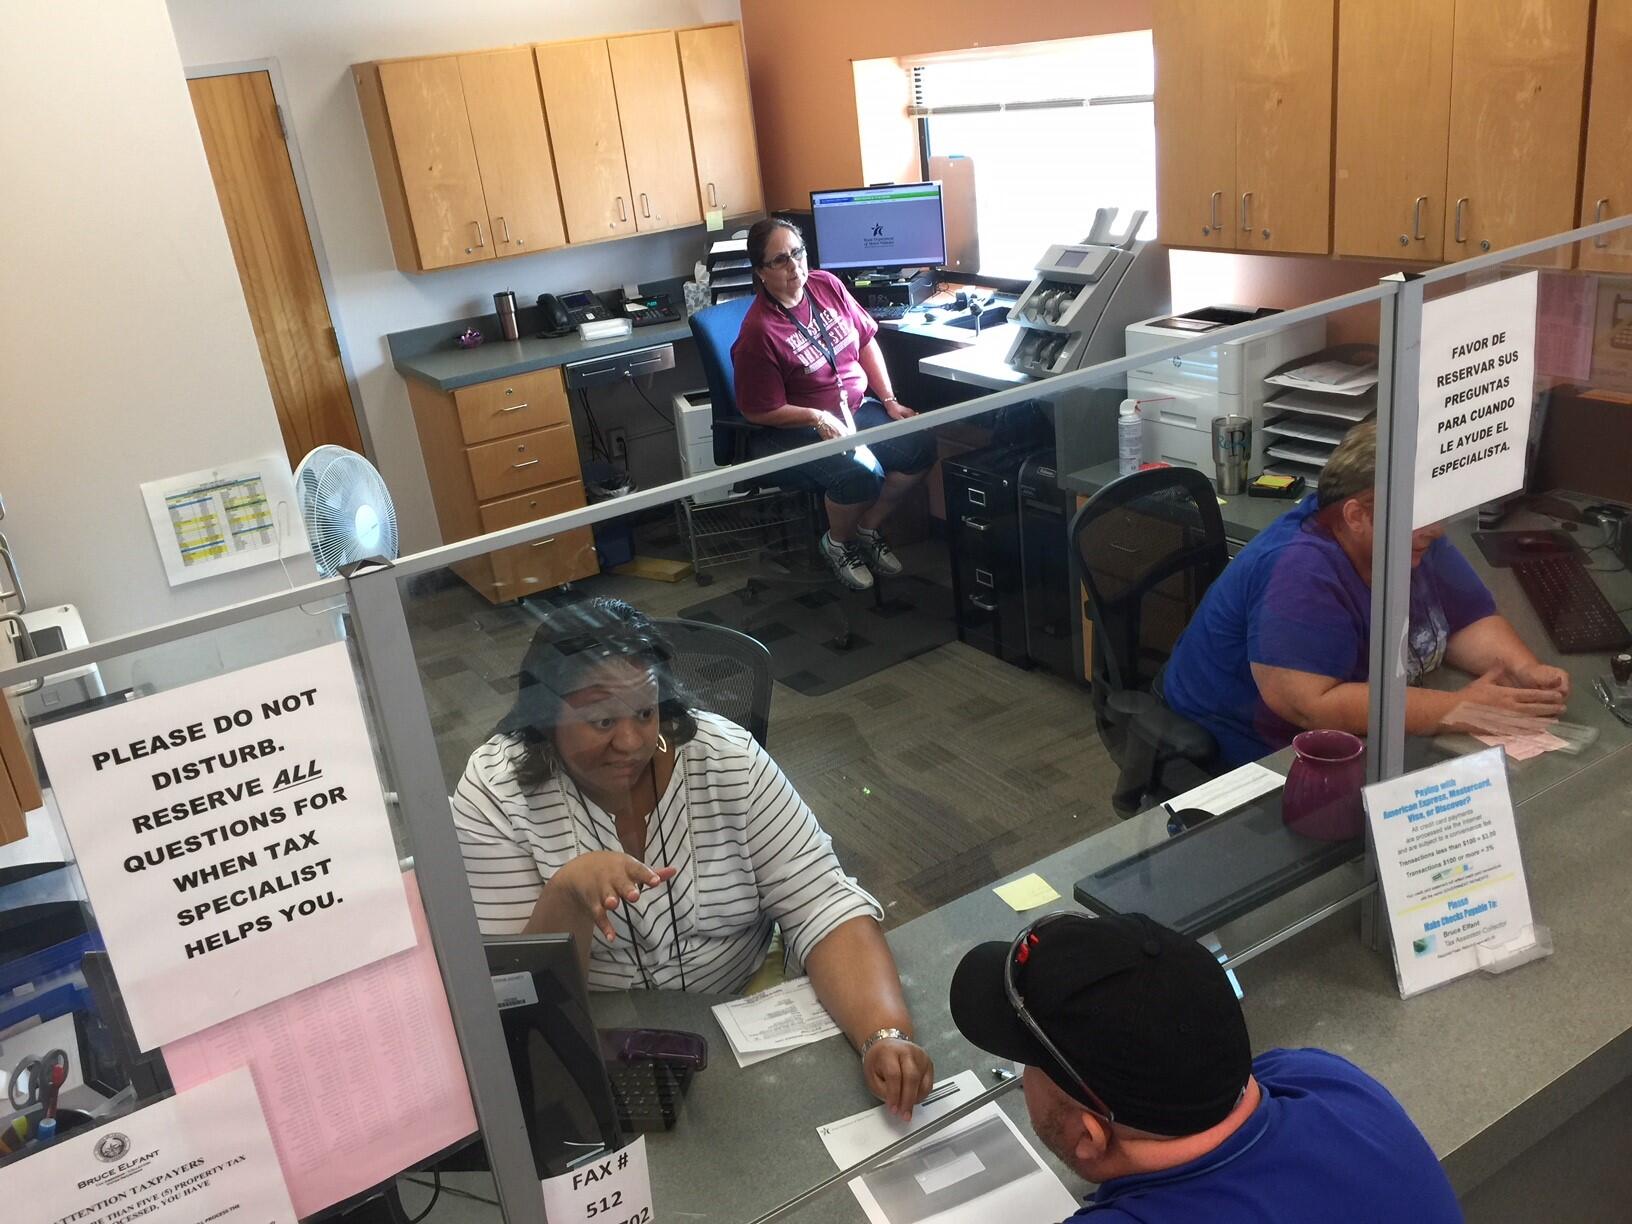 The Travis County Tax Office Southeast branch is open! (Travis County